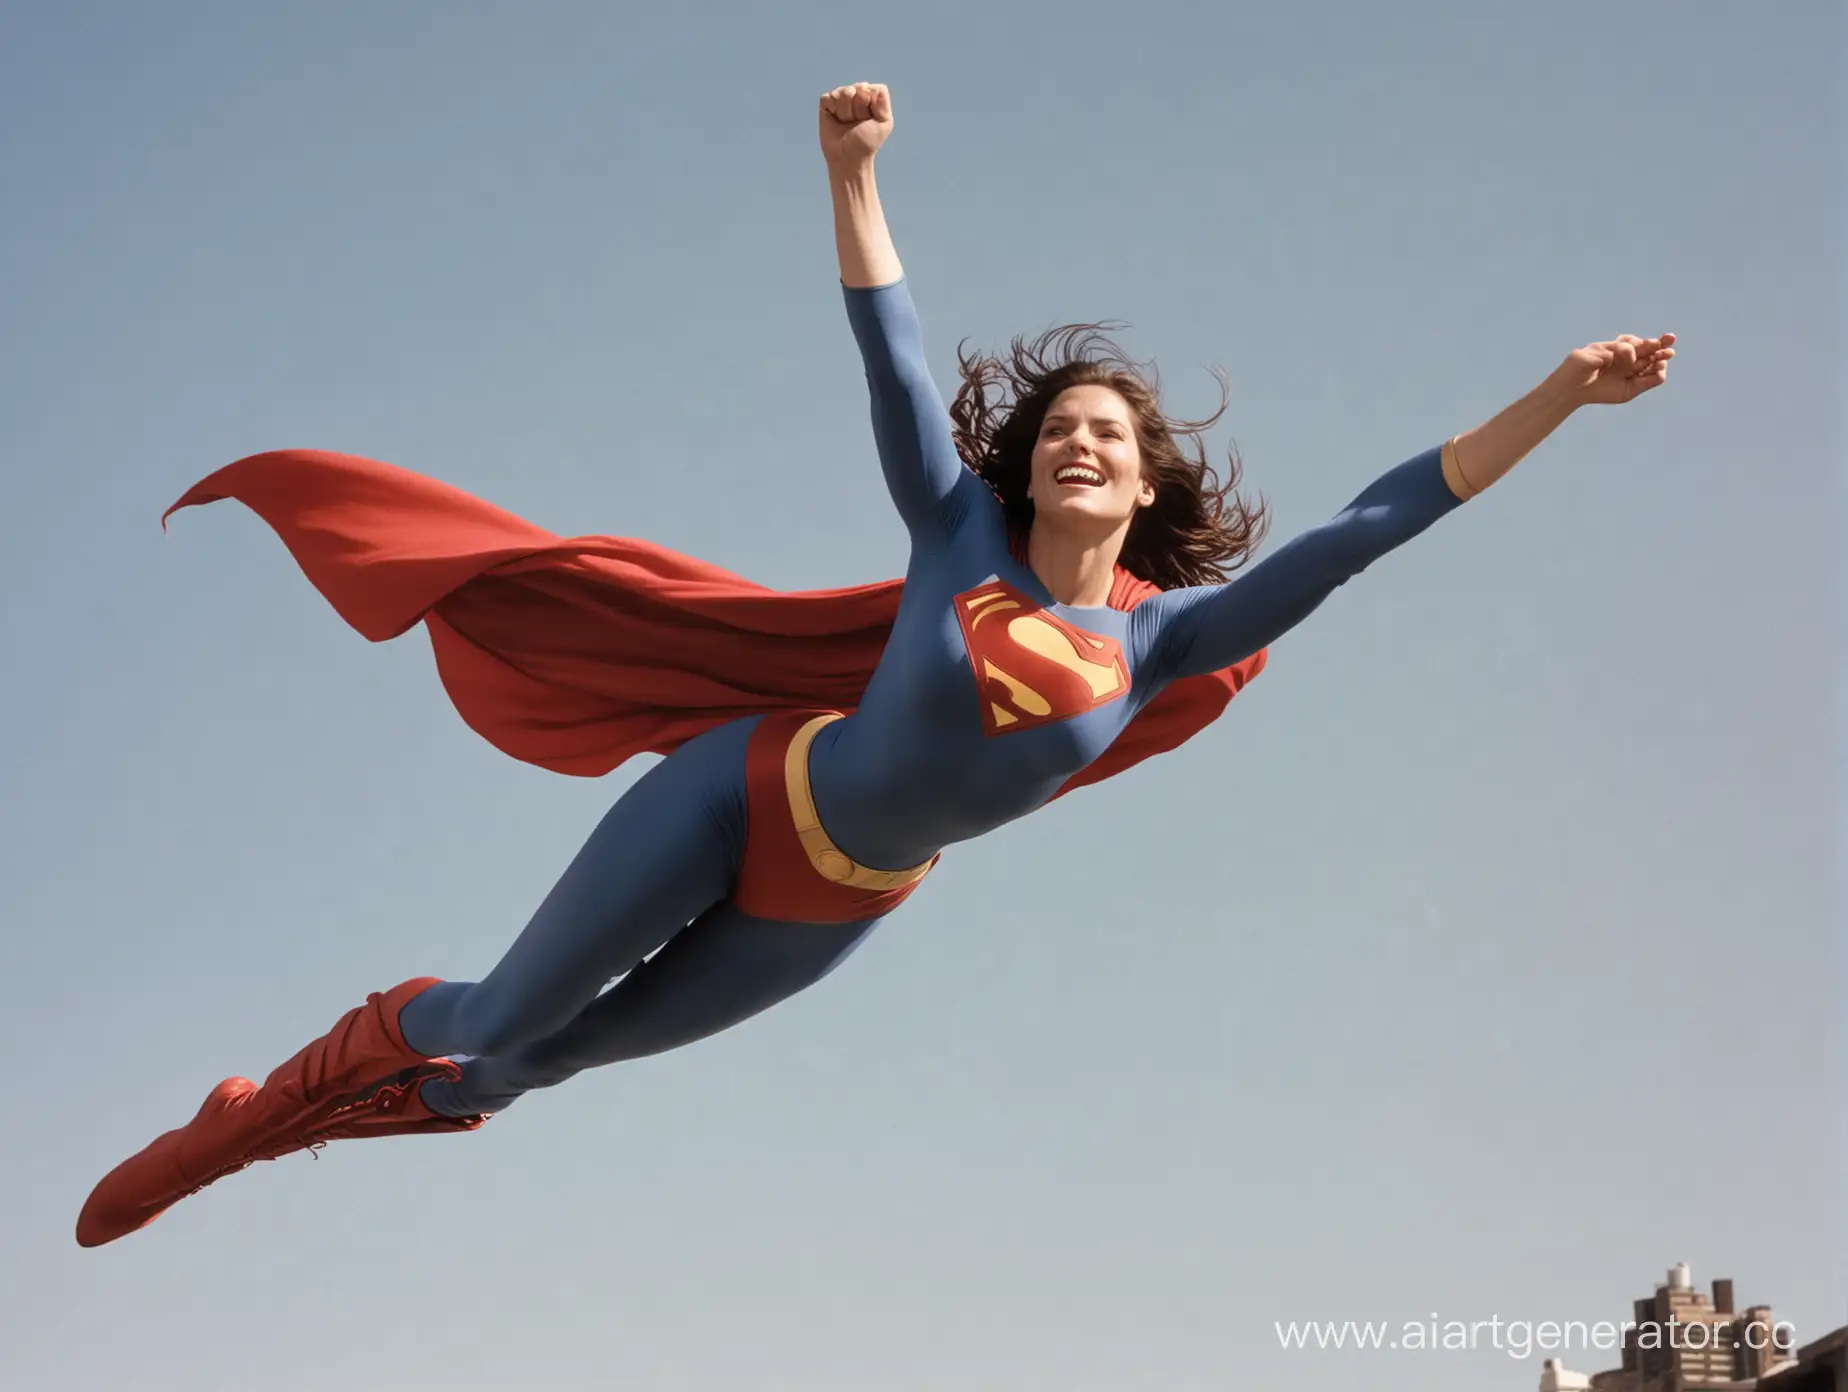 A female version of Superman, she is wearing the classic Superman costume worn by Christopher Reeve in “Superman: The Movie”, her body is fit and athletic, she is flying in the sky like Superman, her arms are reaching out in front of her, her hands are fists, she is laughing